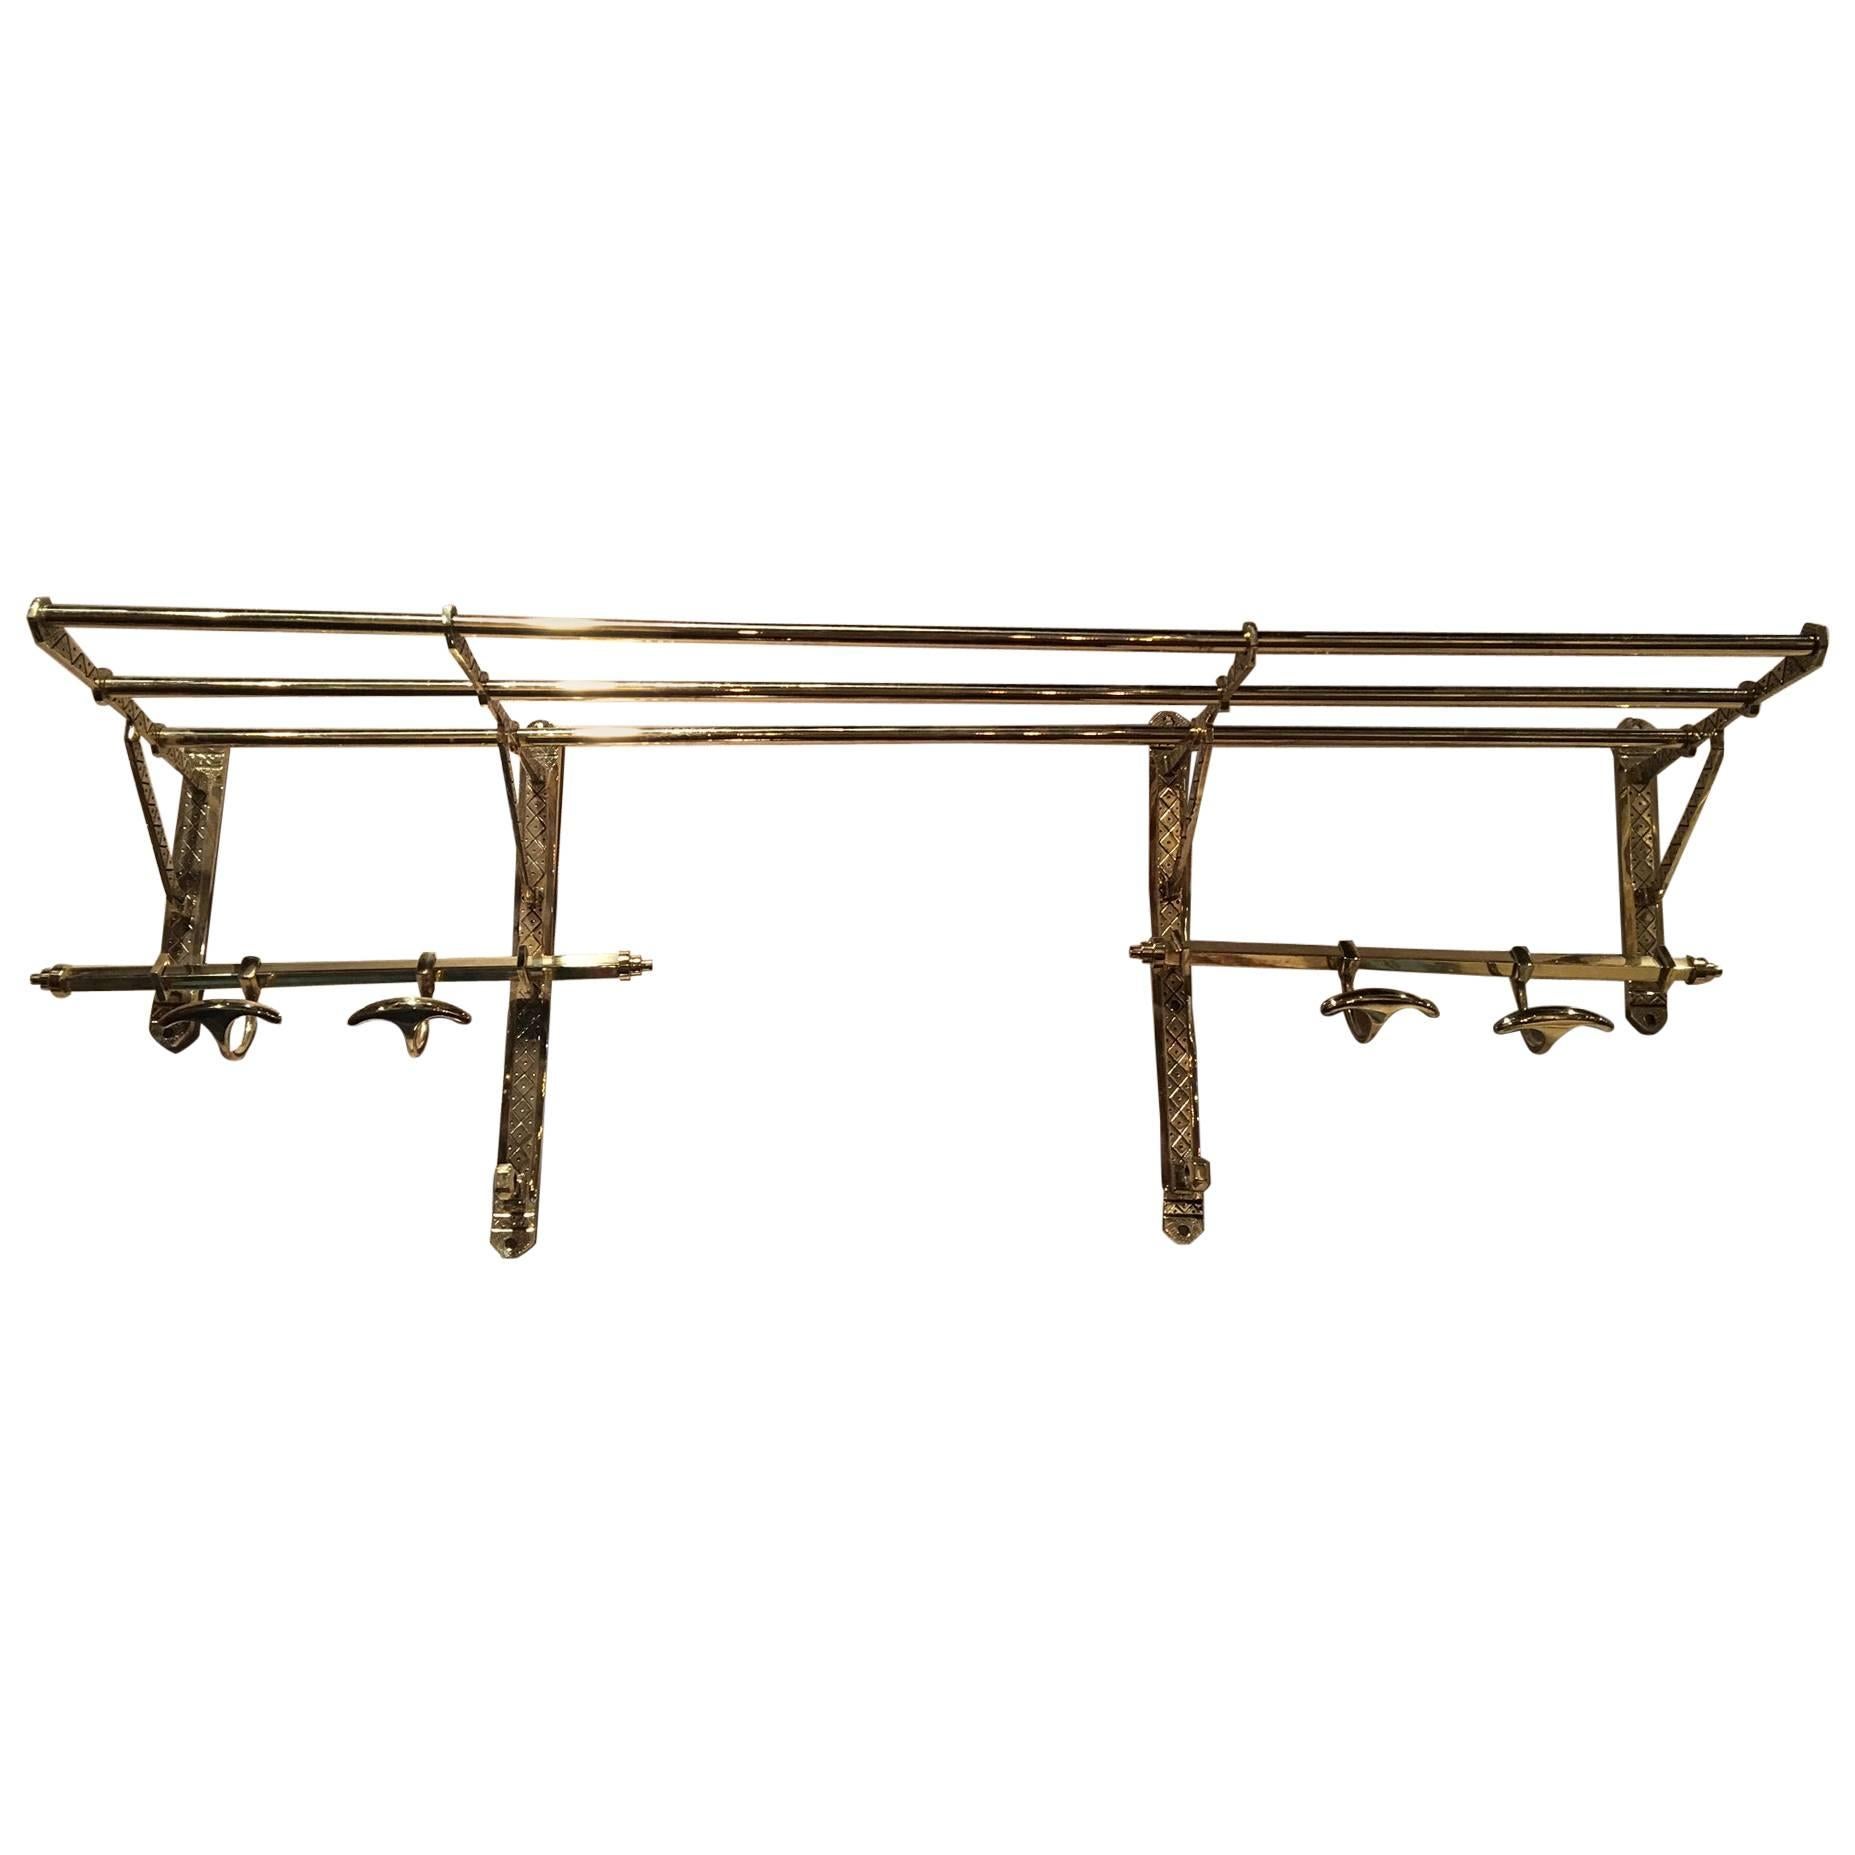 French Solid Brass Coat Rack and Wall Shelf, 19th Century